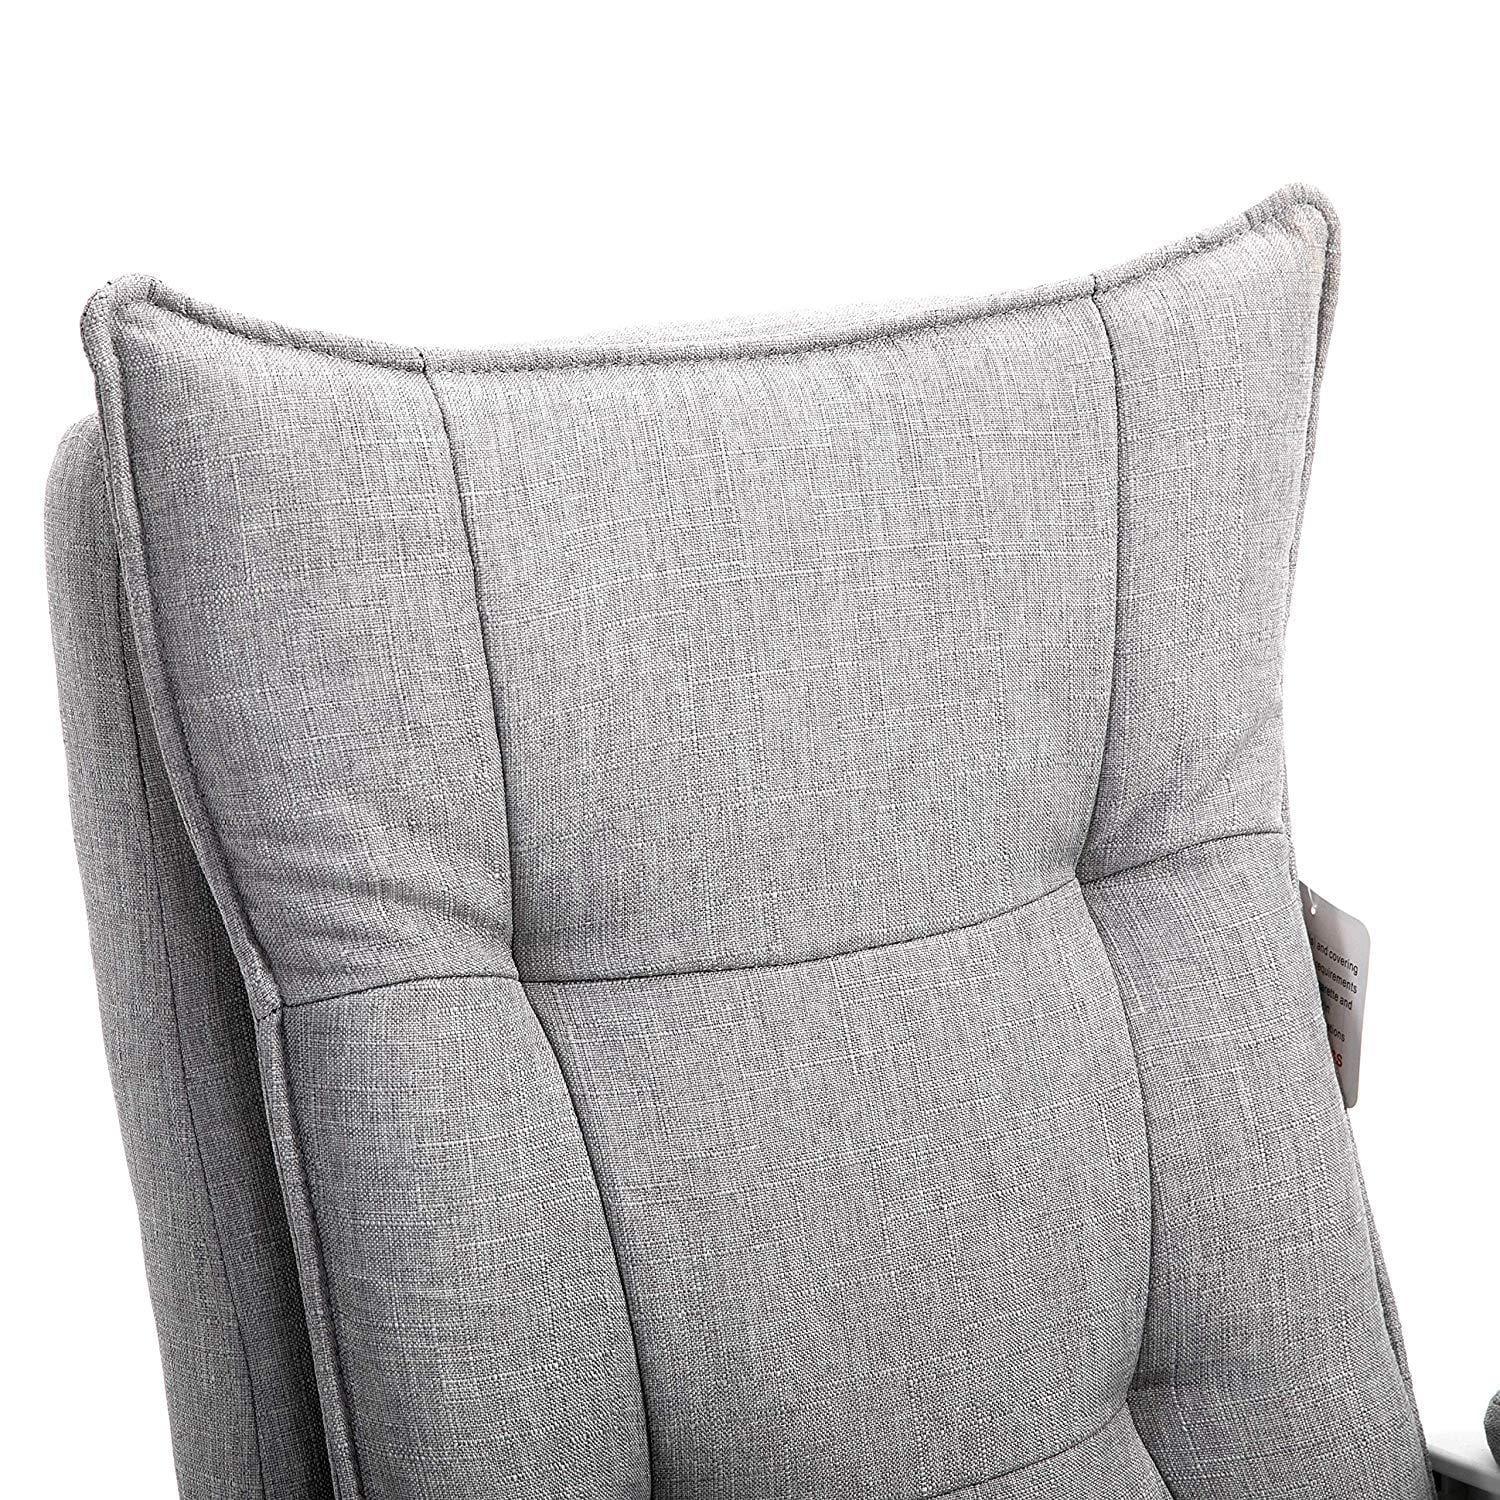 Executive Double Layer Padding Recline Office Desk Chair with Footrest, MR77 Grey Fabric